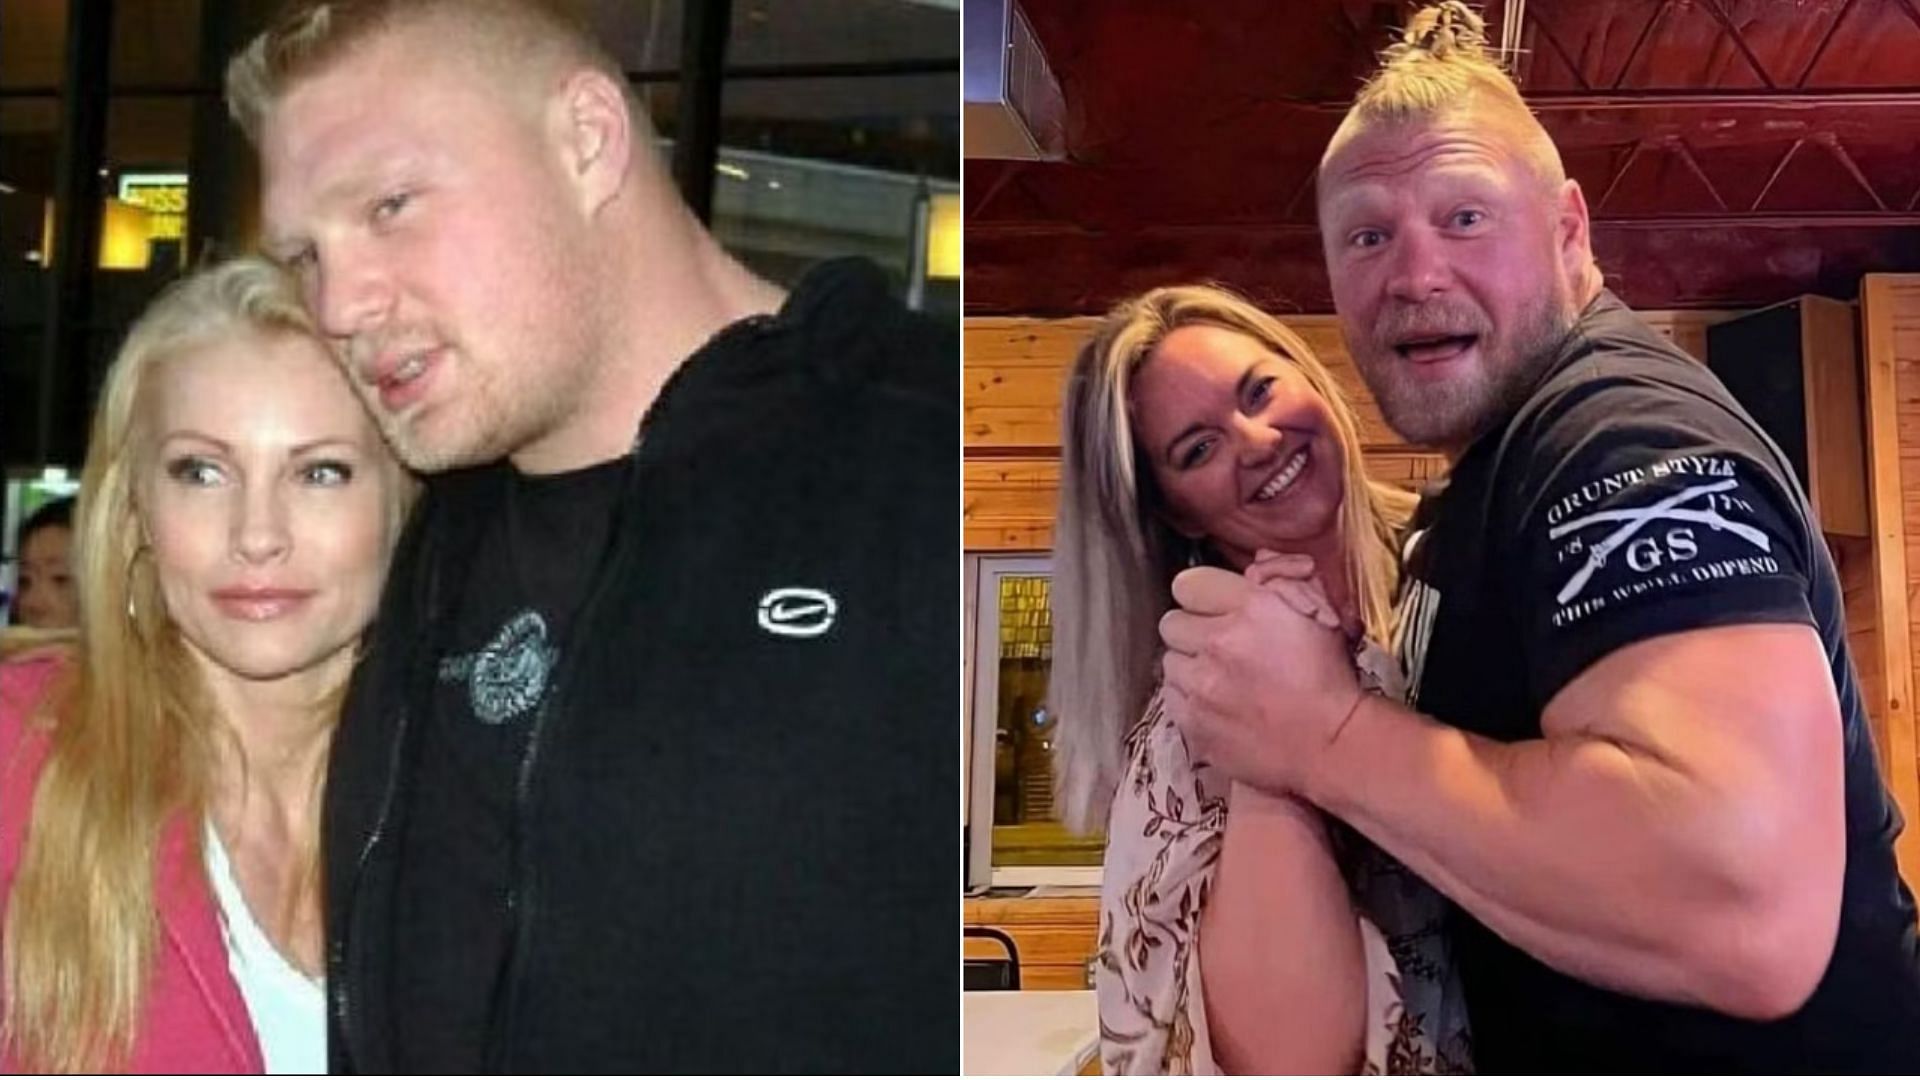 Brock Lesnar has been married to Sable for almost 17 years